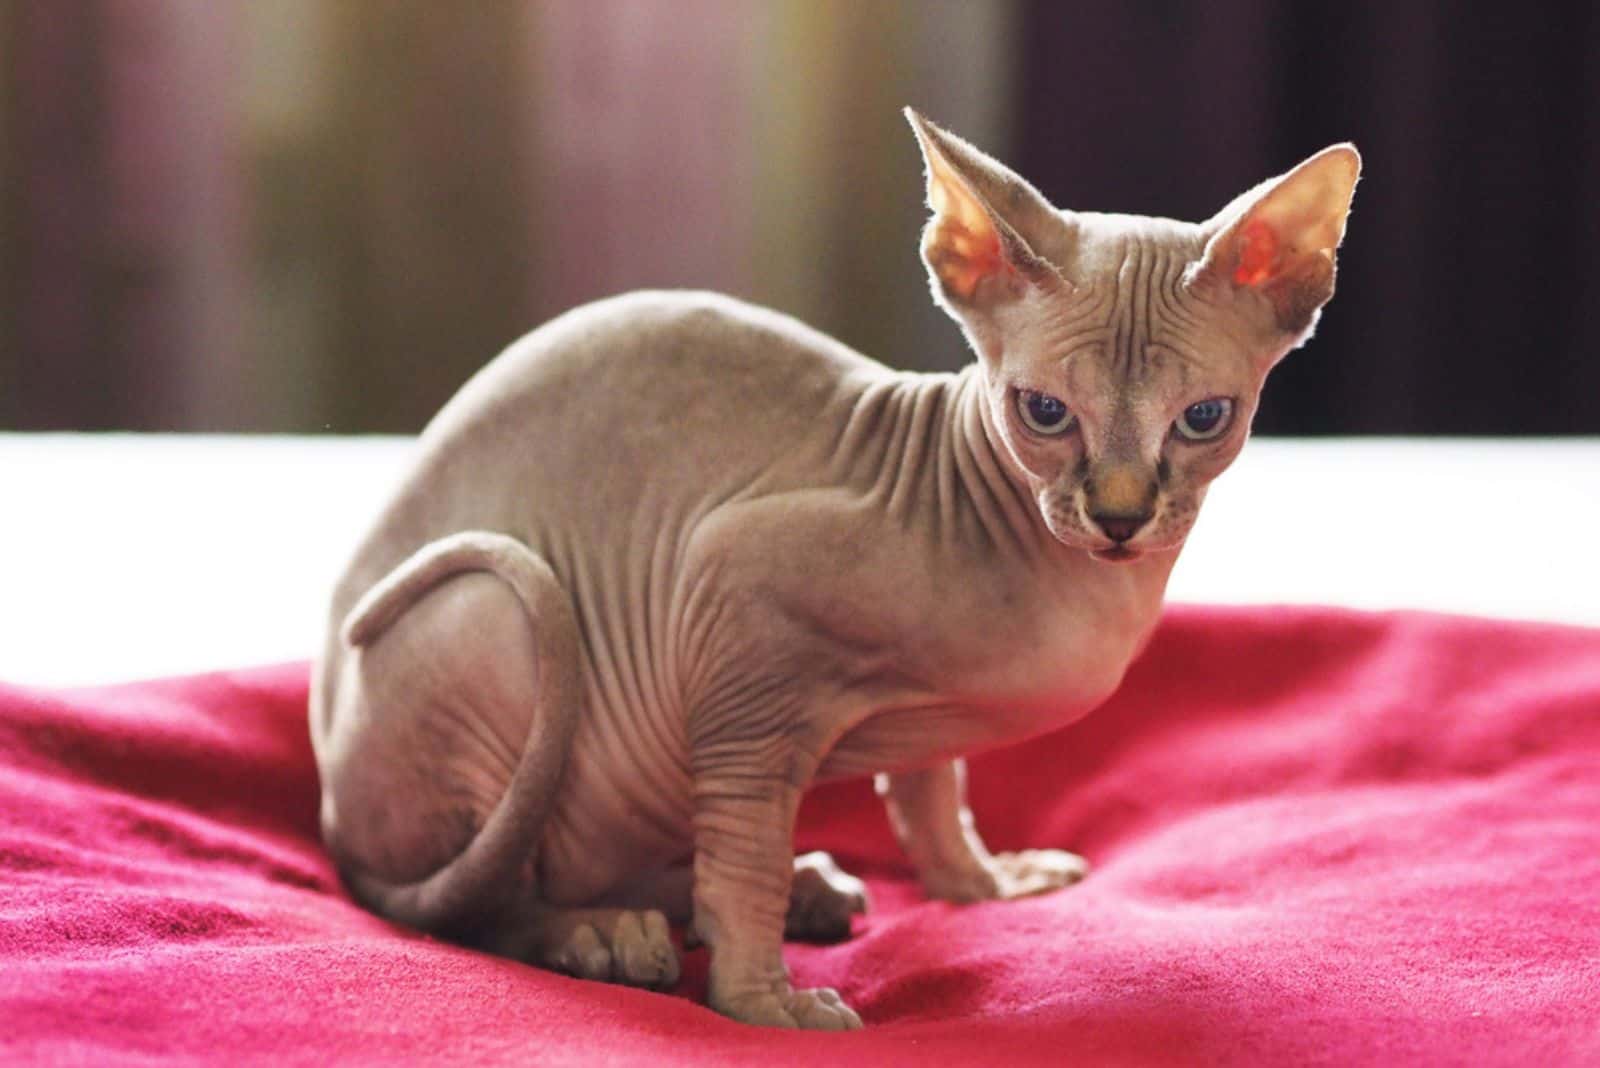 sphynx cat is sitting on the bed